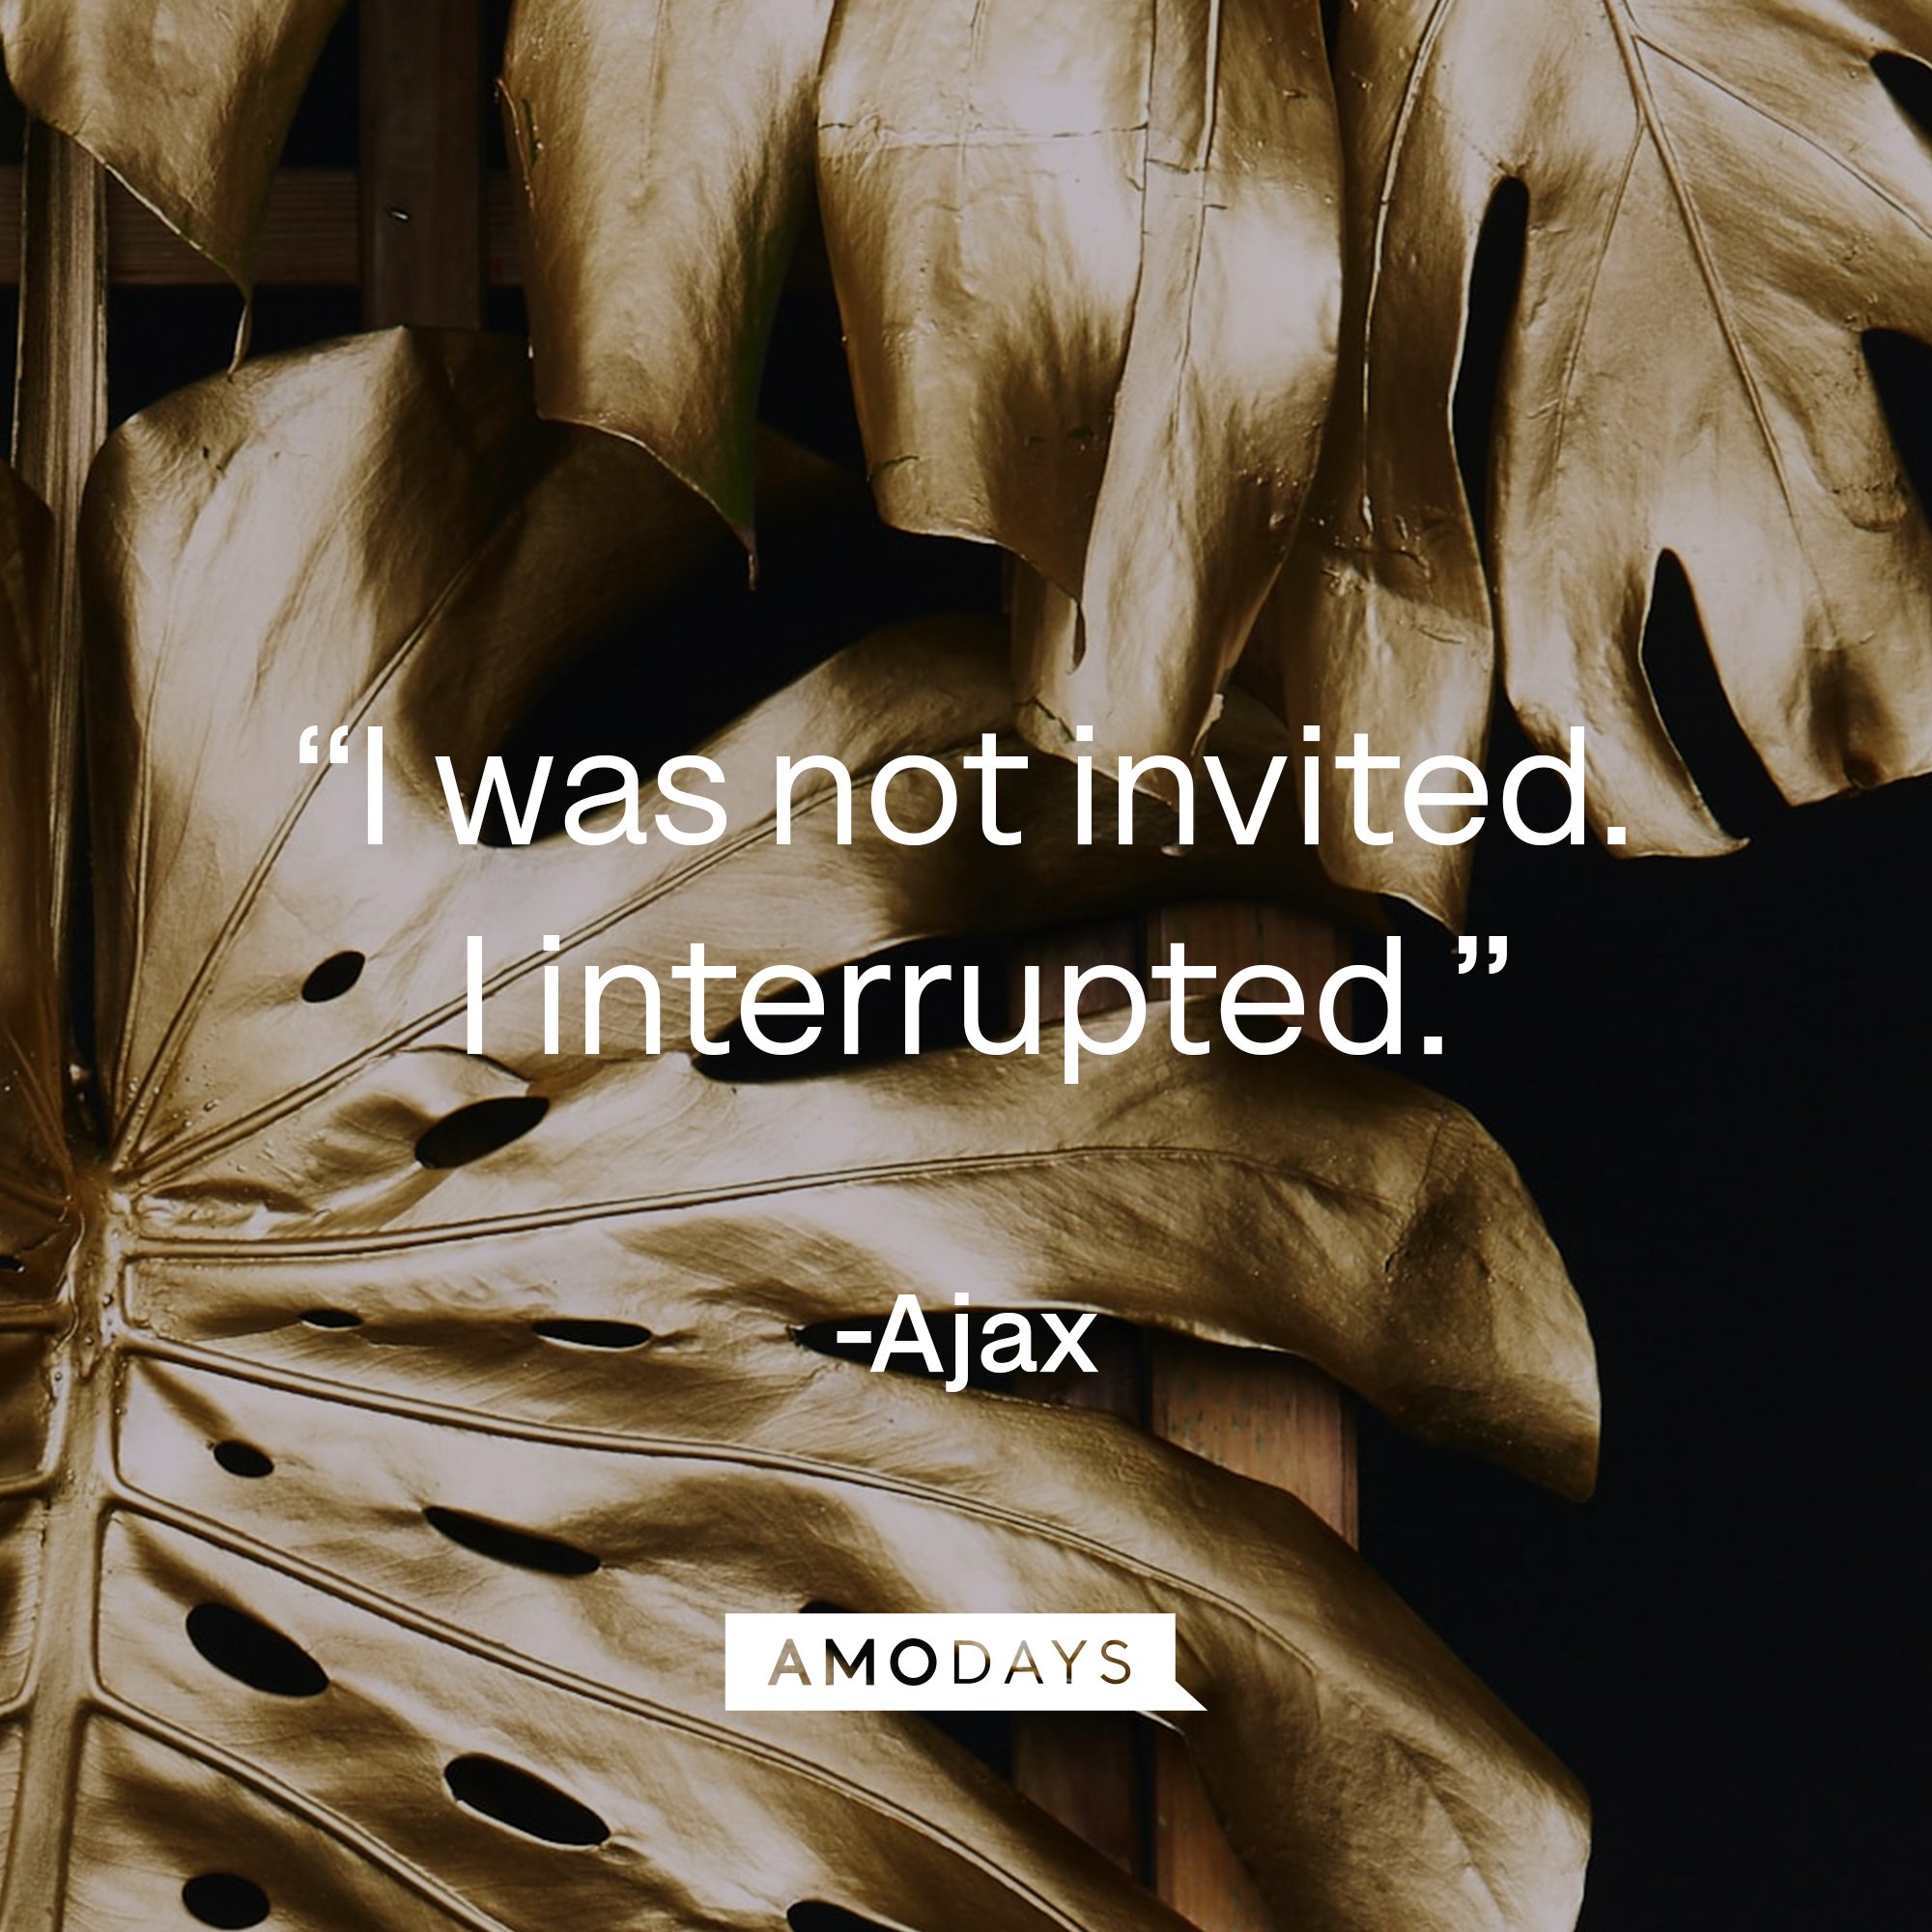 Ajax's quote: “I was not invited. I interrupted.” | Image: AmoDays